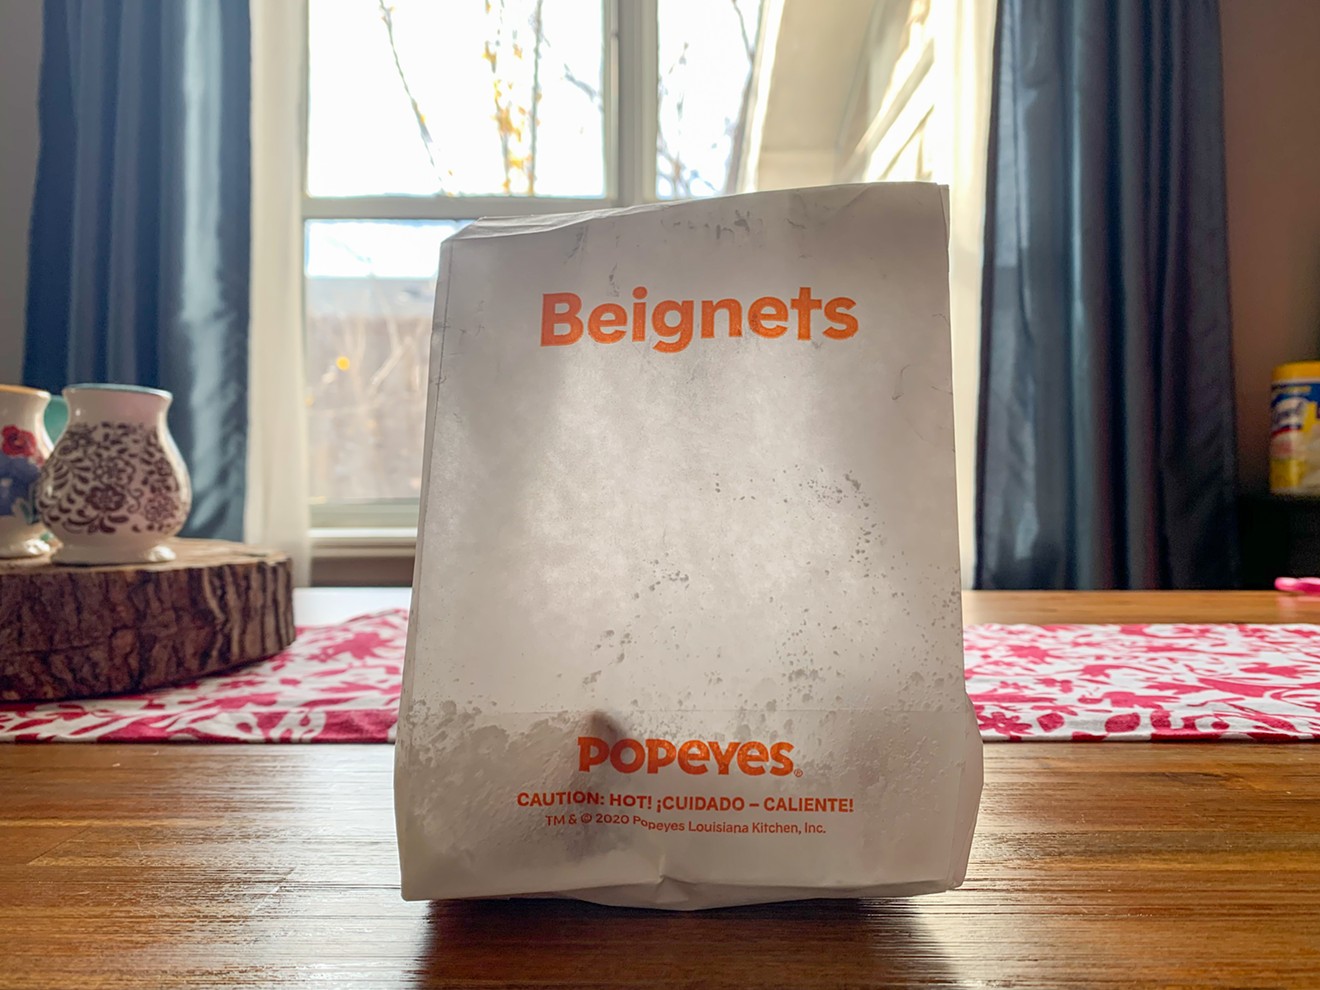 Beignets from Popeyes have arrived.